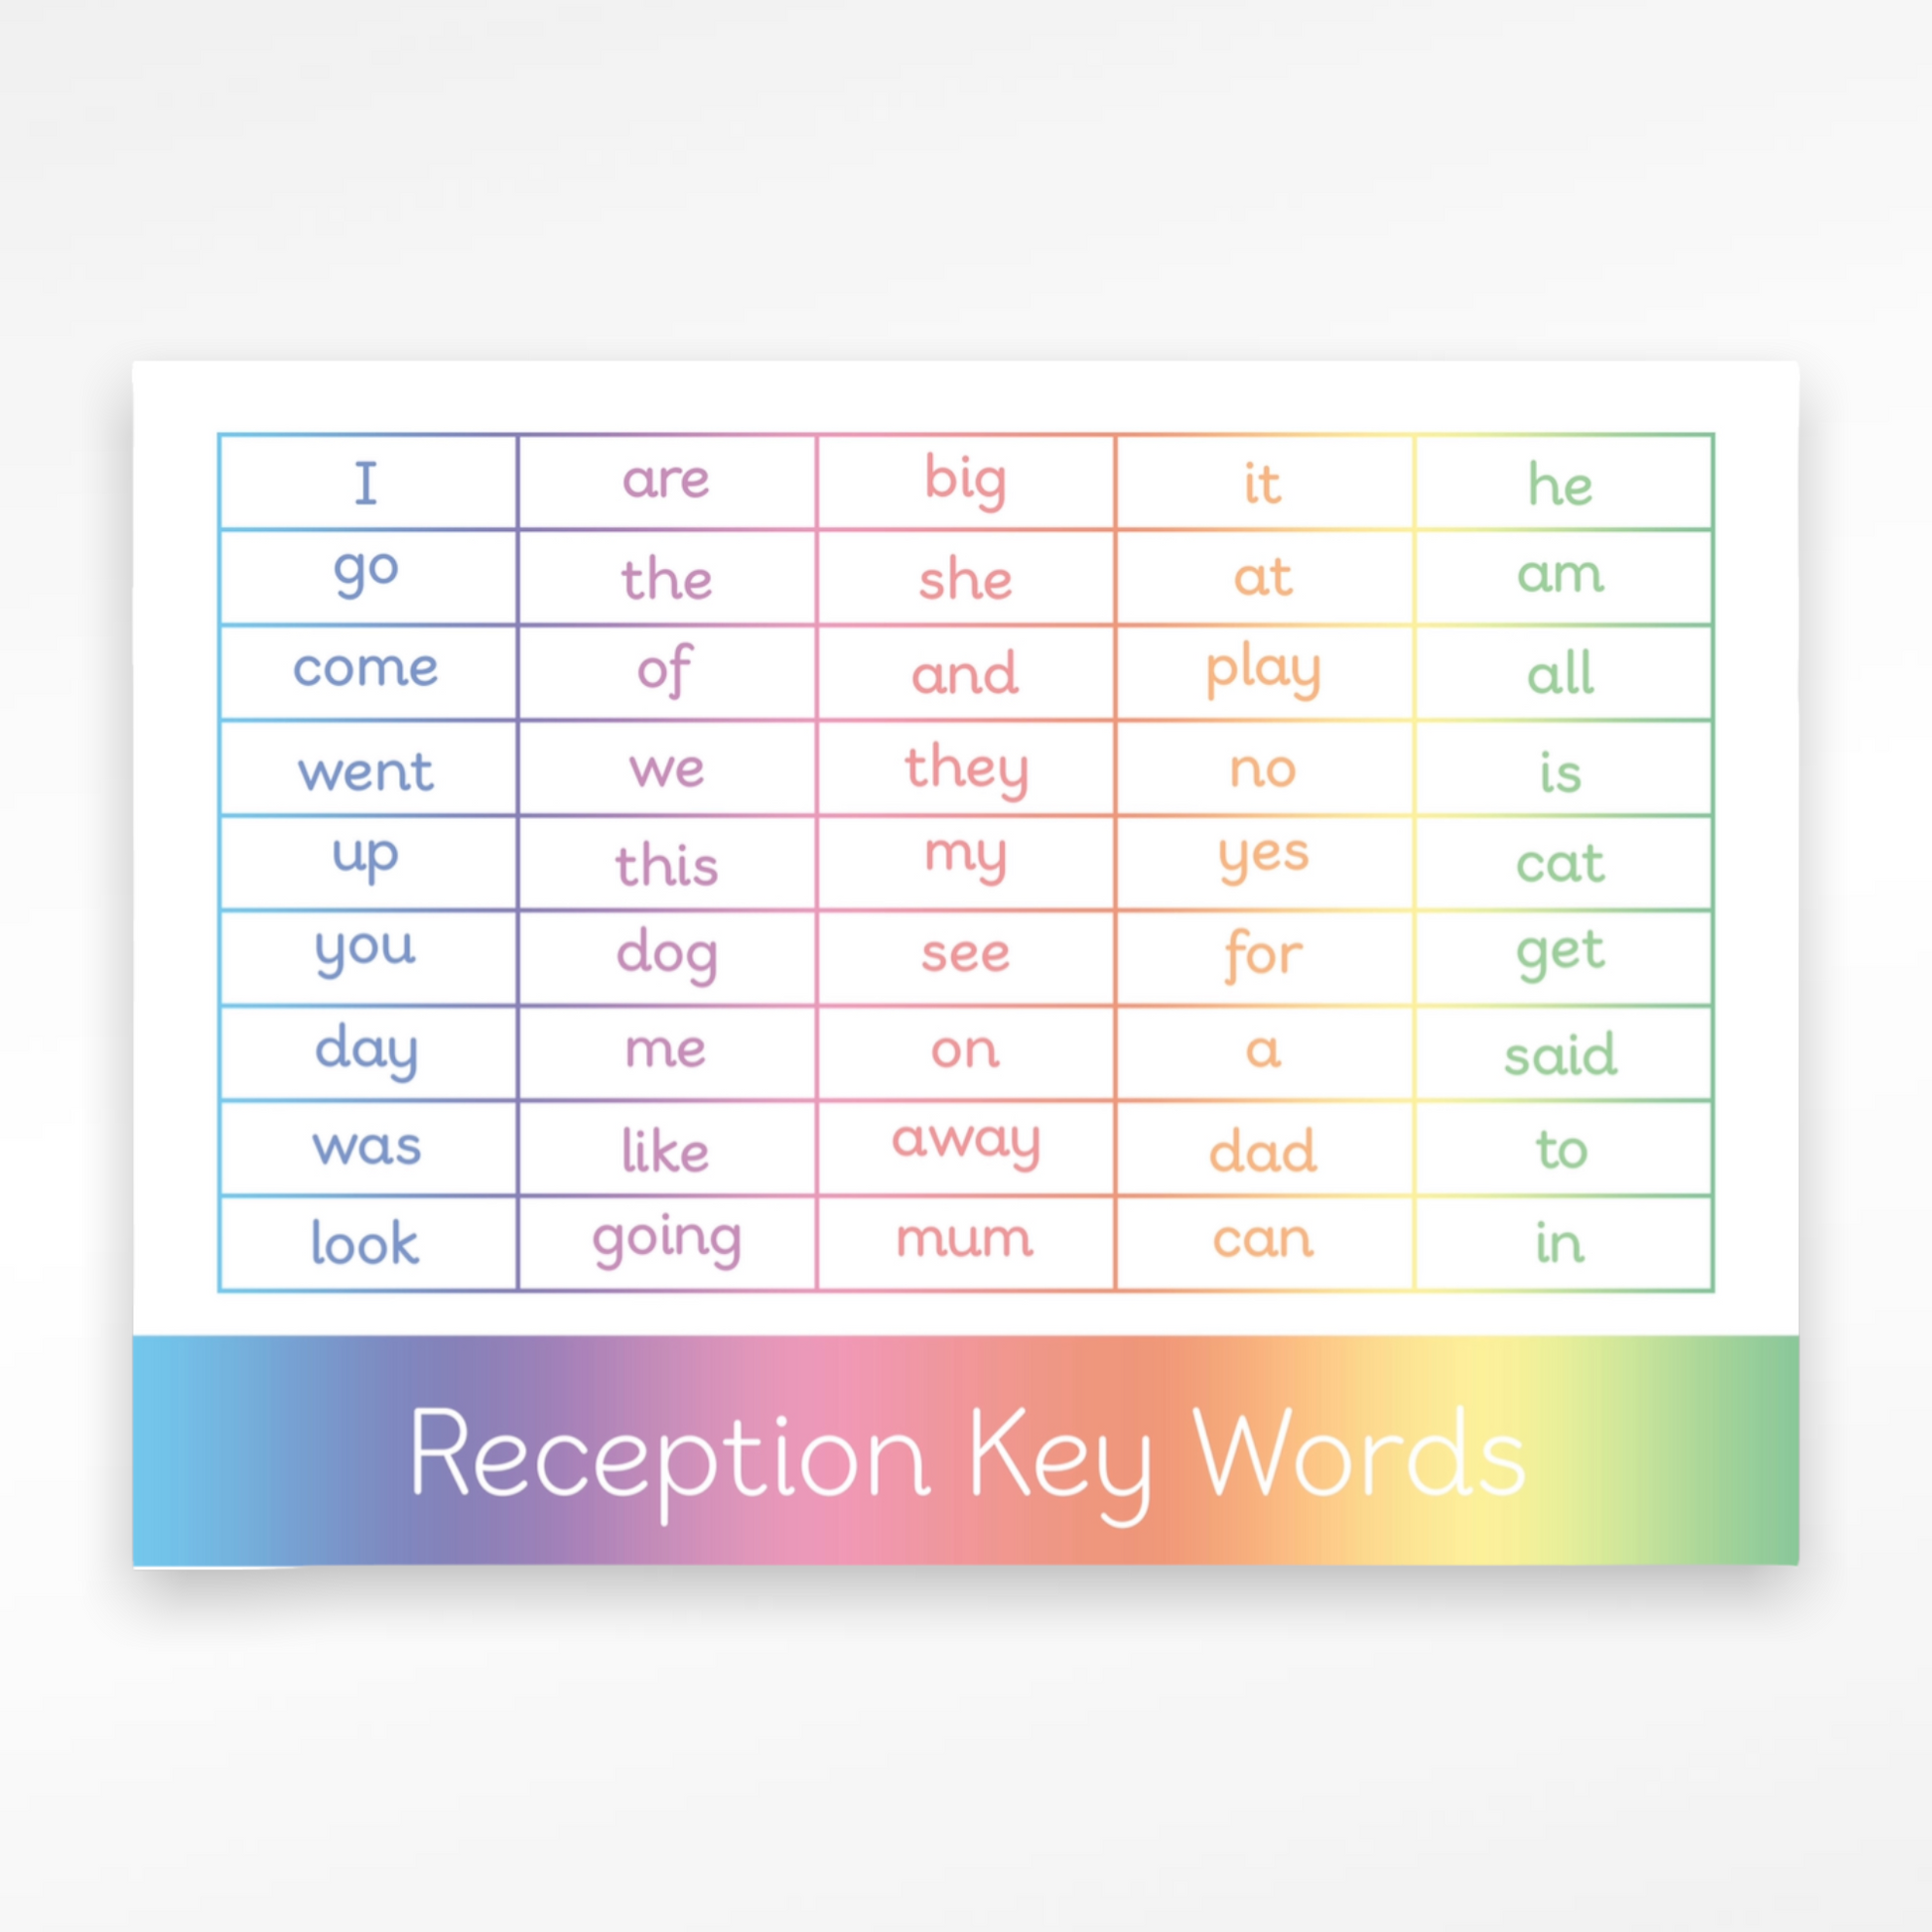 Reception Key Words Learning Mat | Resources to help prepare children for starting school